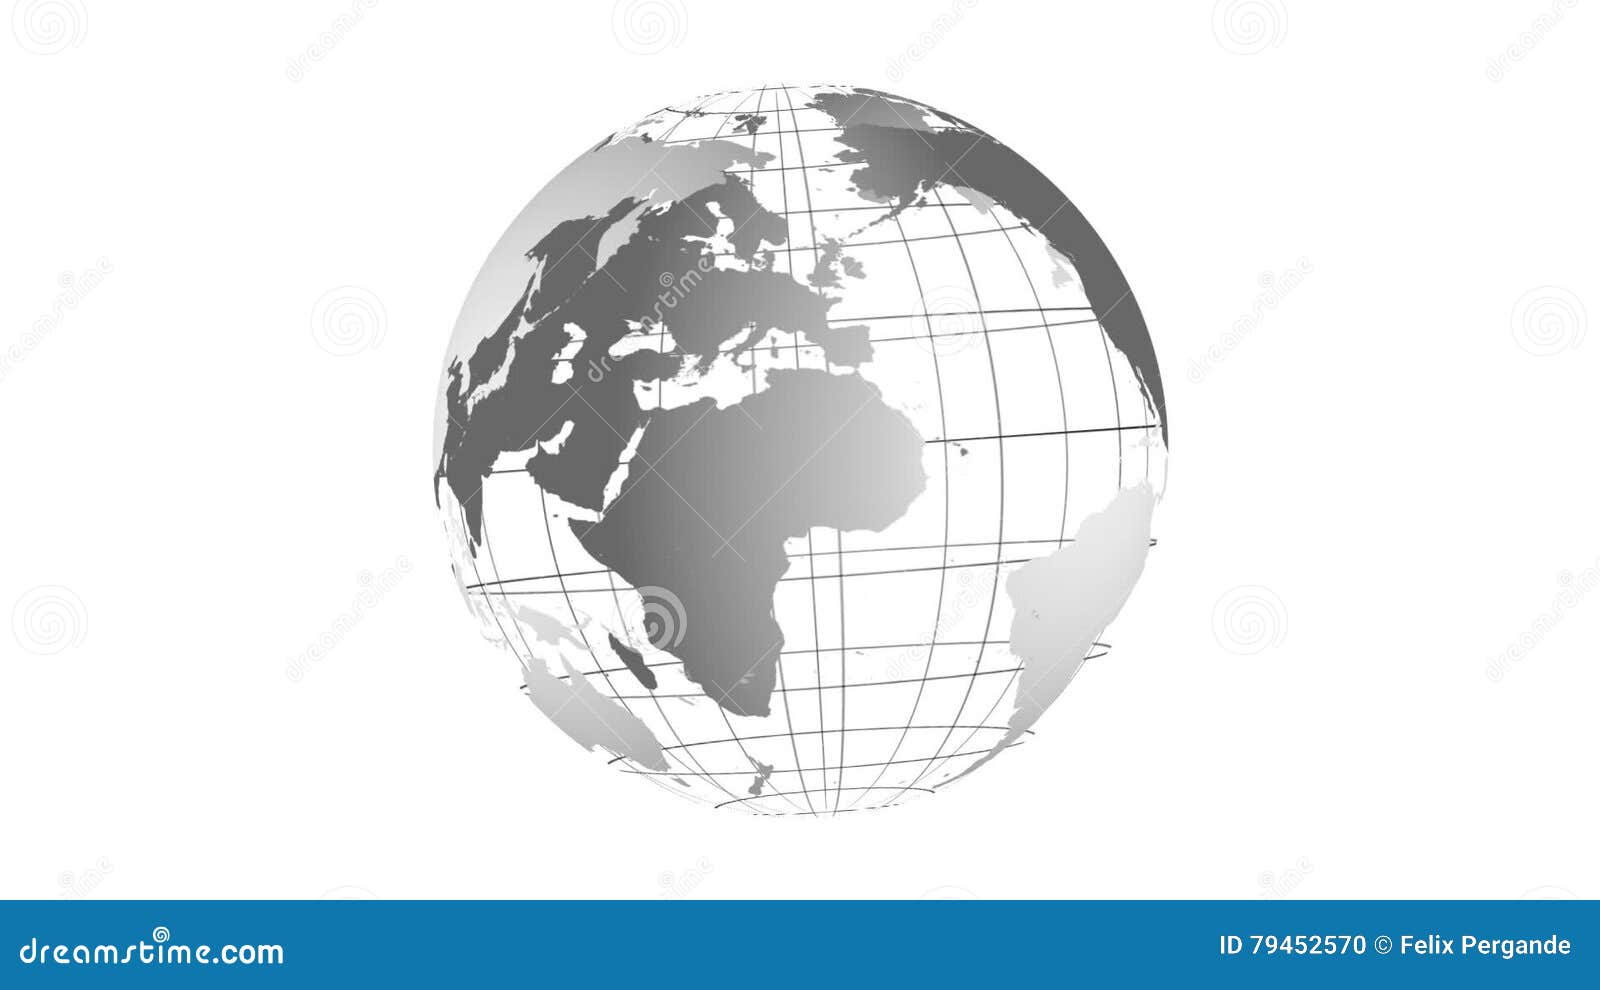 Rotating globe animation stock footage. Video of full - 79452570